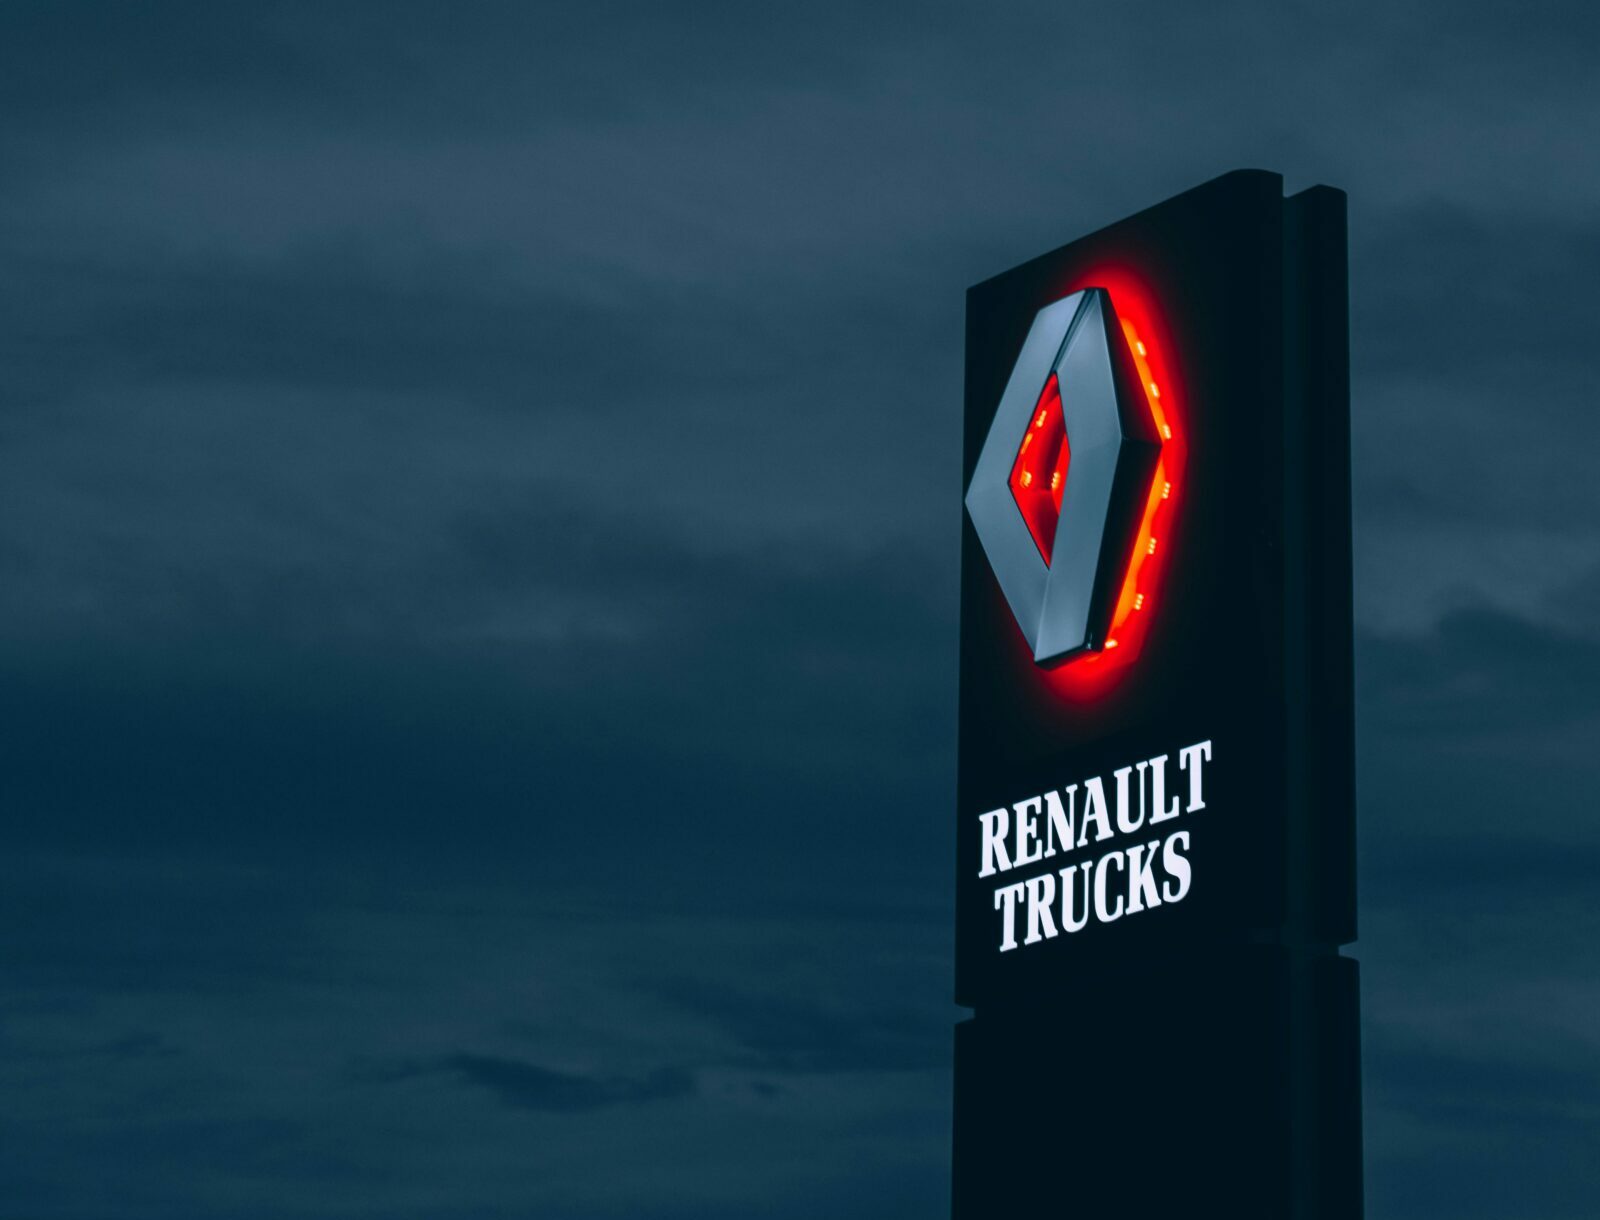 Black and red sign of Renault Trucks during the night.